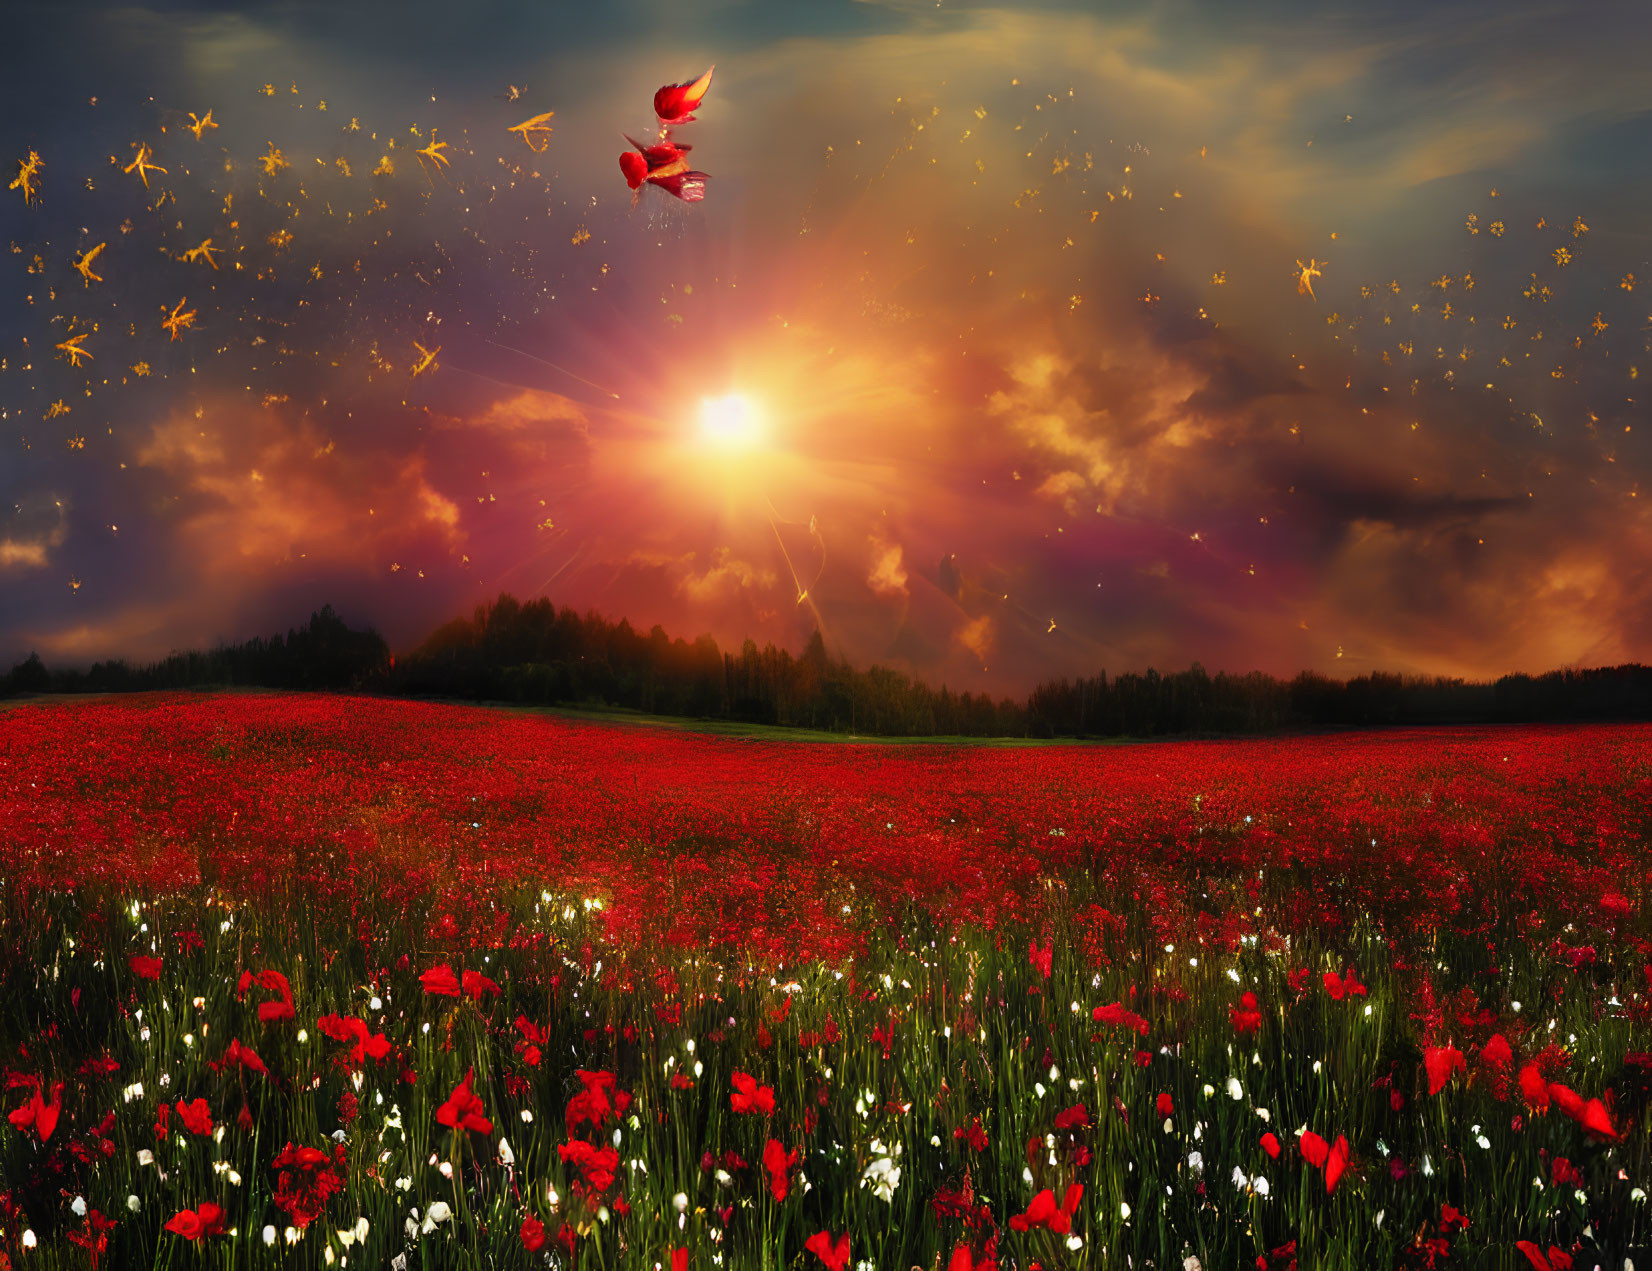 Vibrant sunset over red poppy field with sparkles and soaring birds